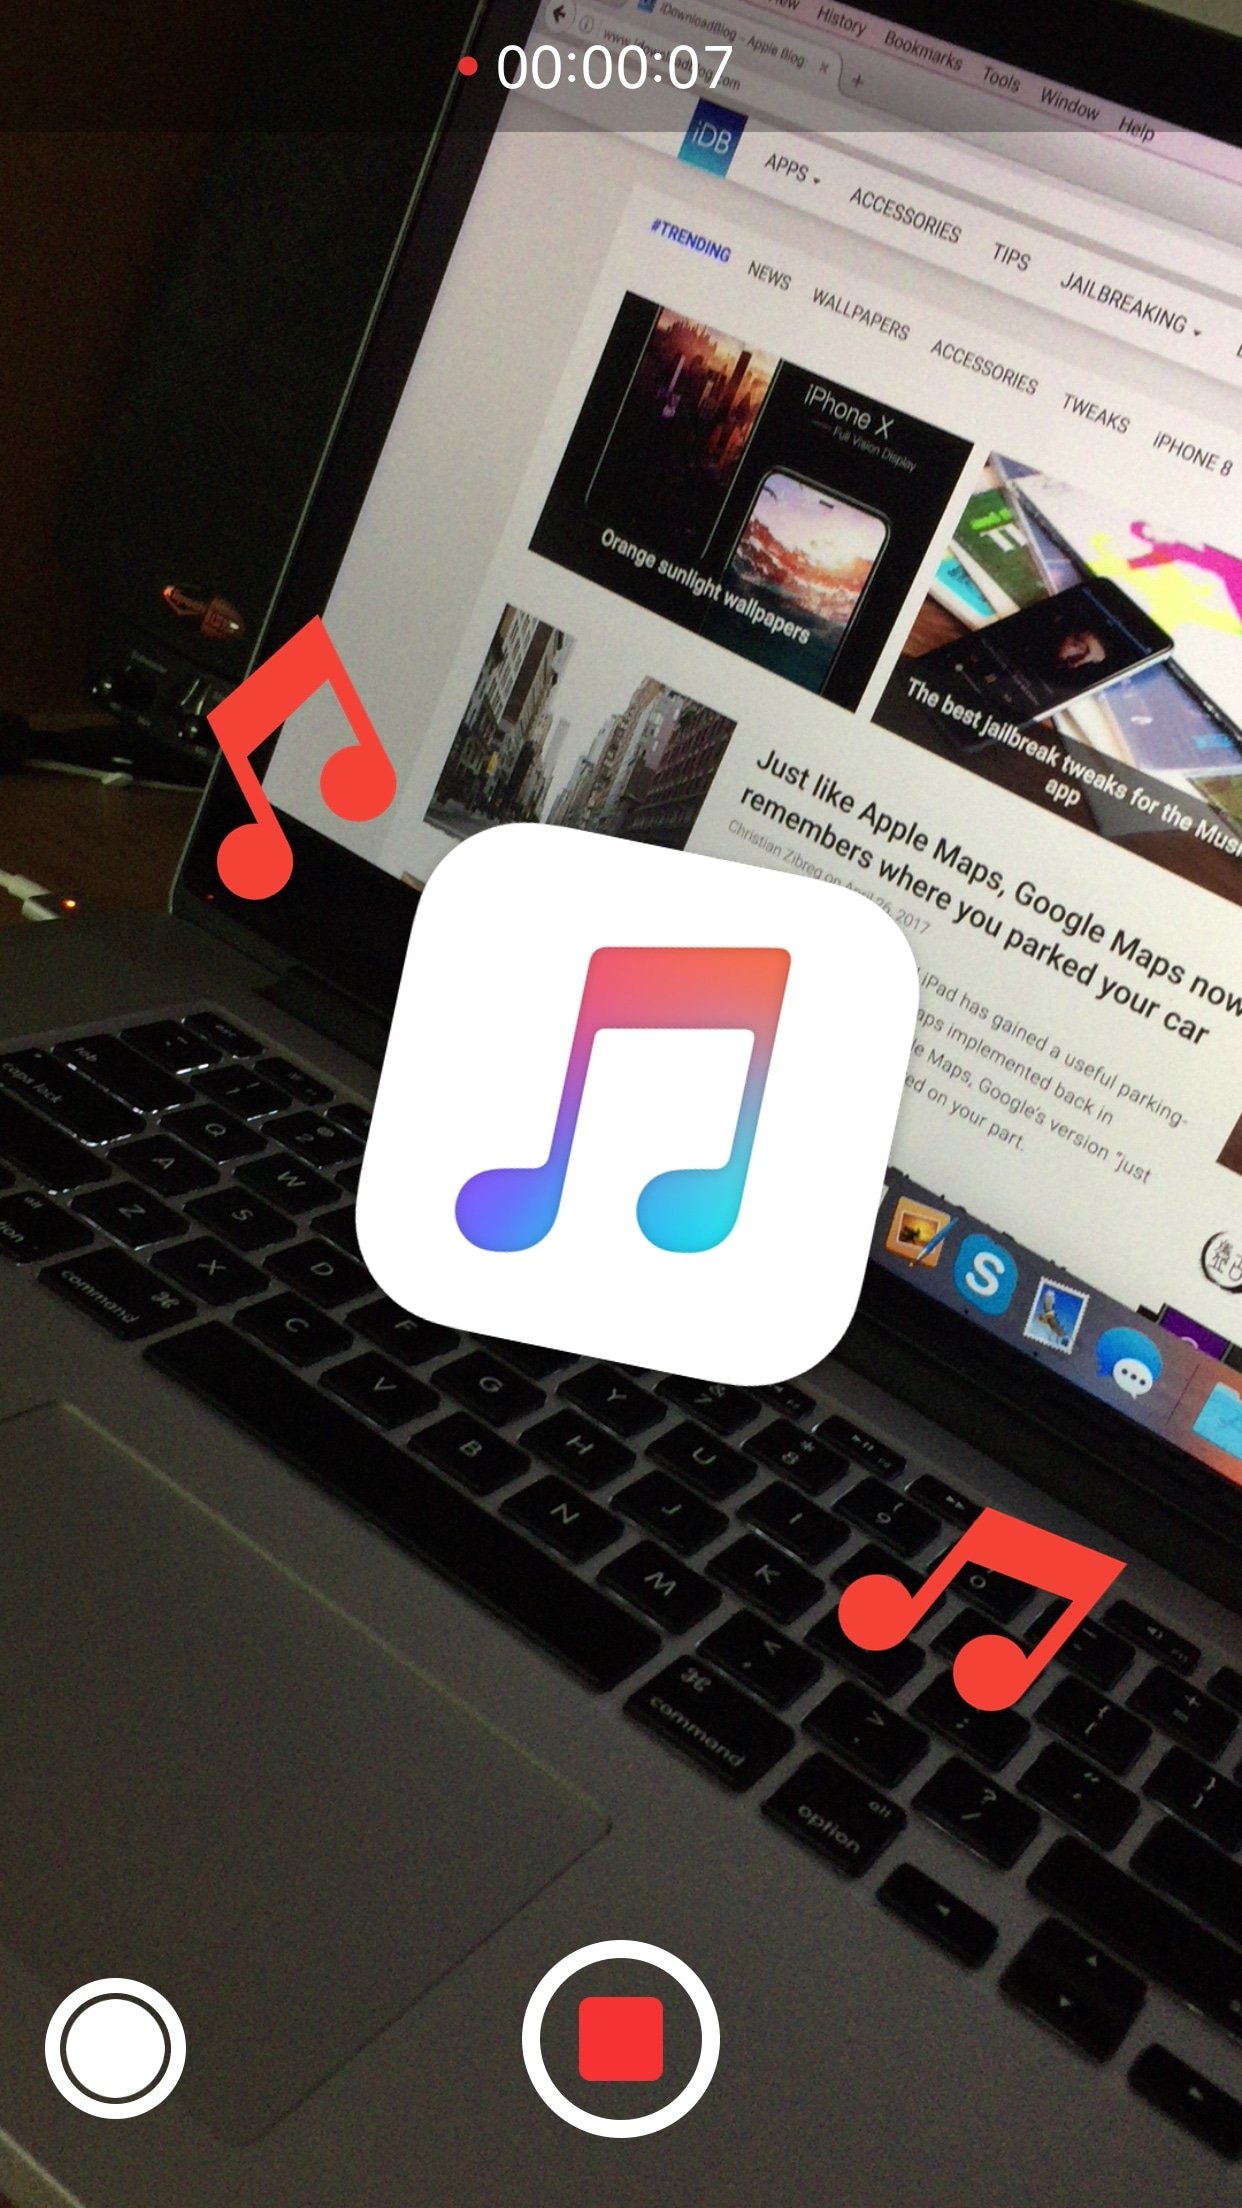 This tweak keeps your music playing while you record video